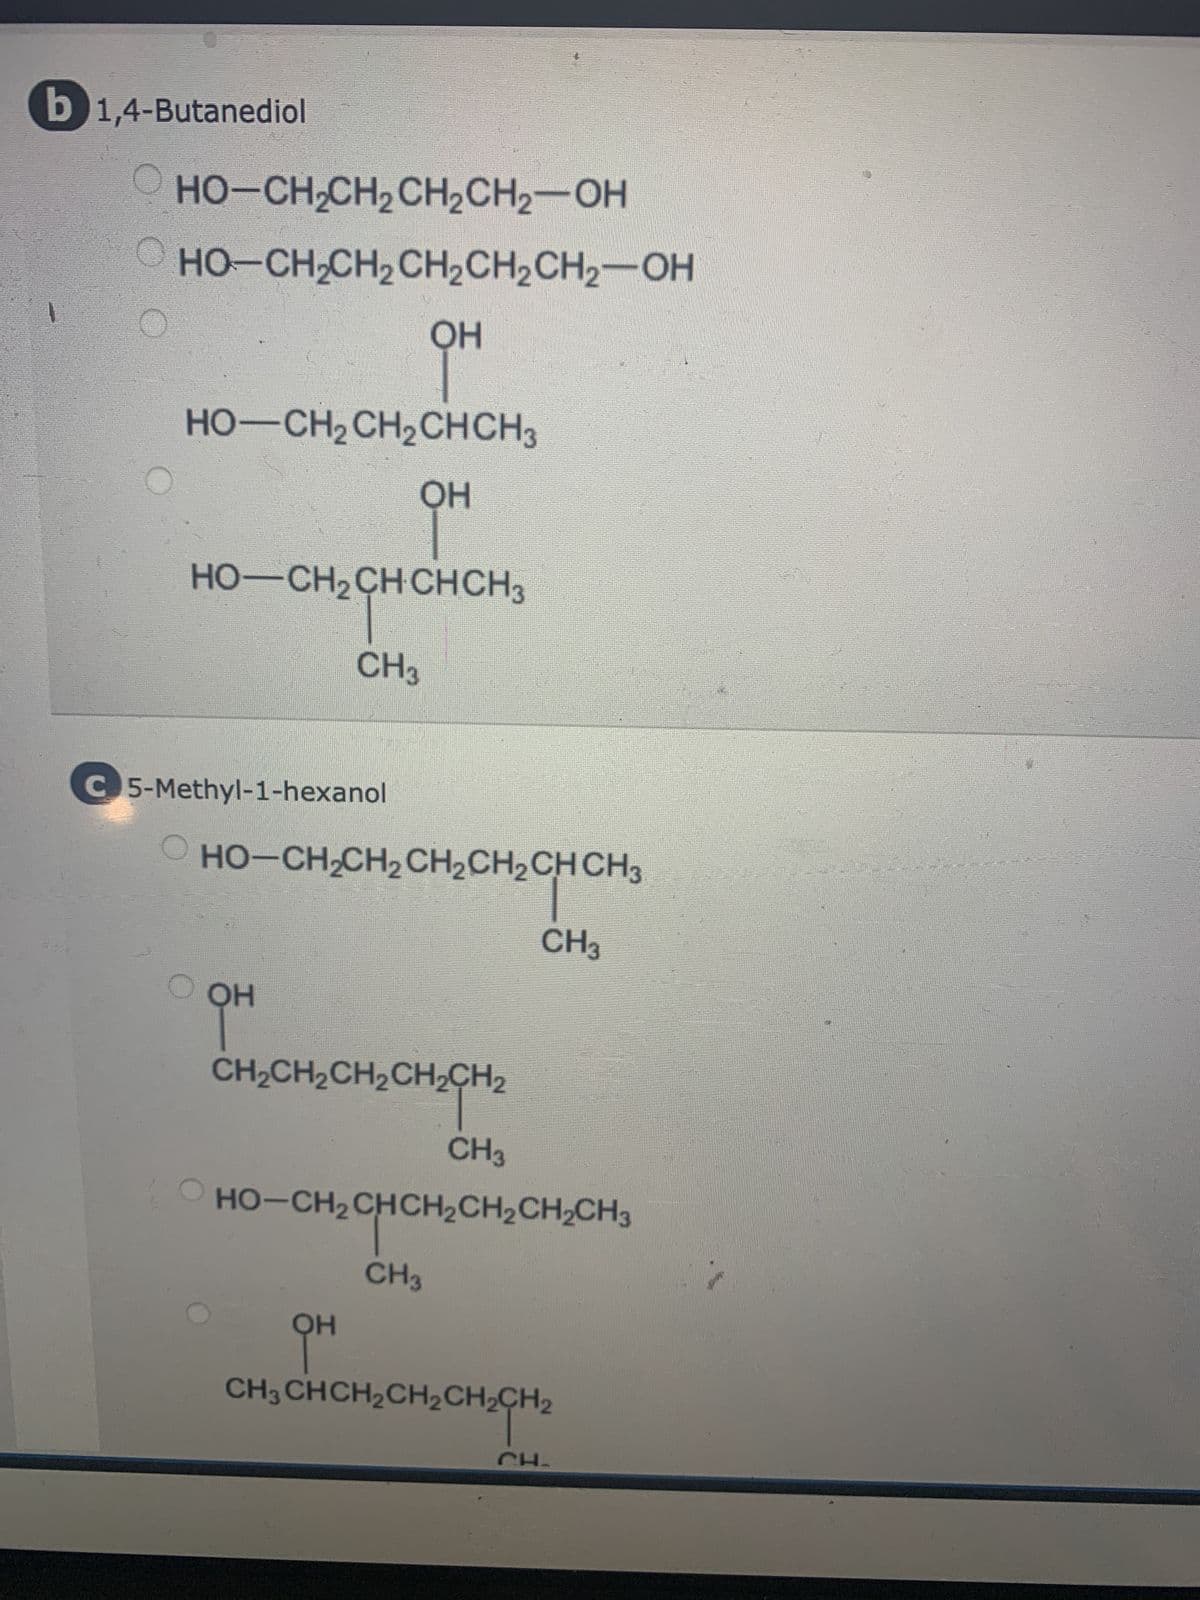 t
ot
pt
pt
1 pt
ment
Choose a structural formula for each of the following alcohols.
a Isobutyl alcohol
CH3
CH3CH CH₂-OH
OH
CH3 CH CH3
CH3
CH3 C CH3
OH
OH
CH3CHCH₂CH3
b1,4-Butanediol
HỌ–CH,CH2CH2CH2—OH
_ HO–CH,CH,CH,CH,CHz—OH
OH
HO—CH2CH2CHCH3
OH
HO–CH,CHCHCH3
Cengage Learning | Cengage Technical Support
MacBook Pro